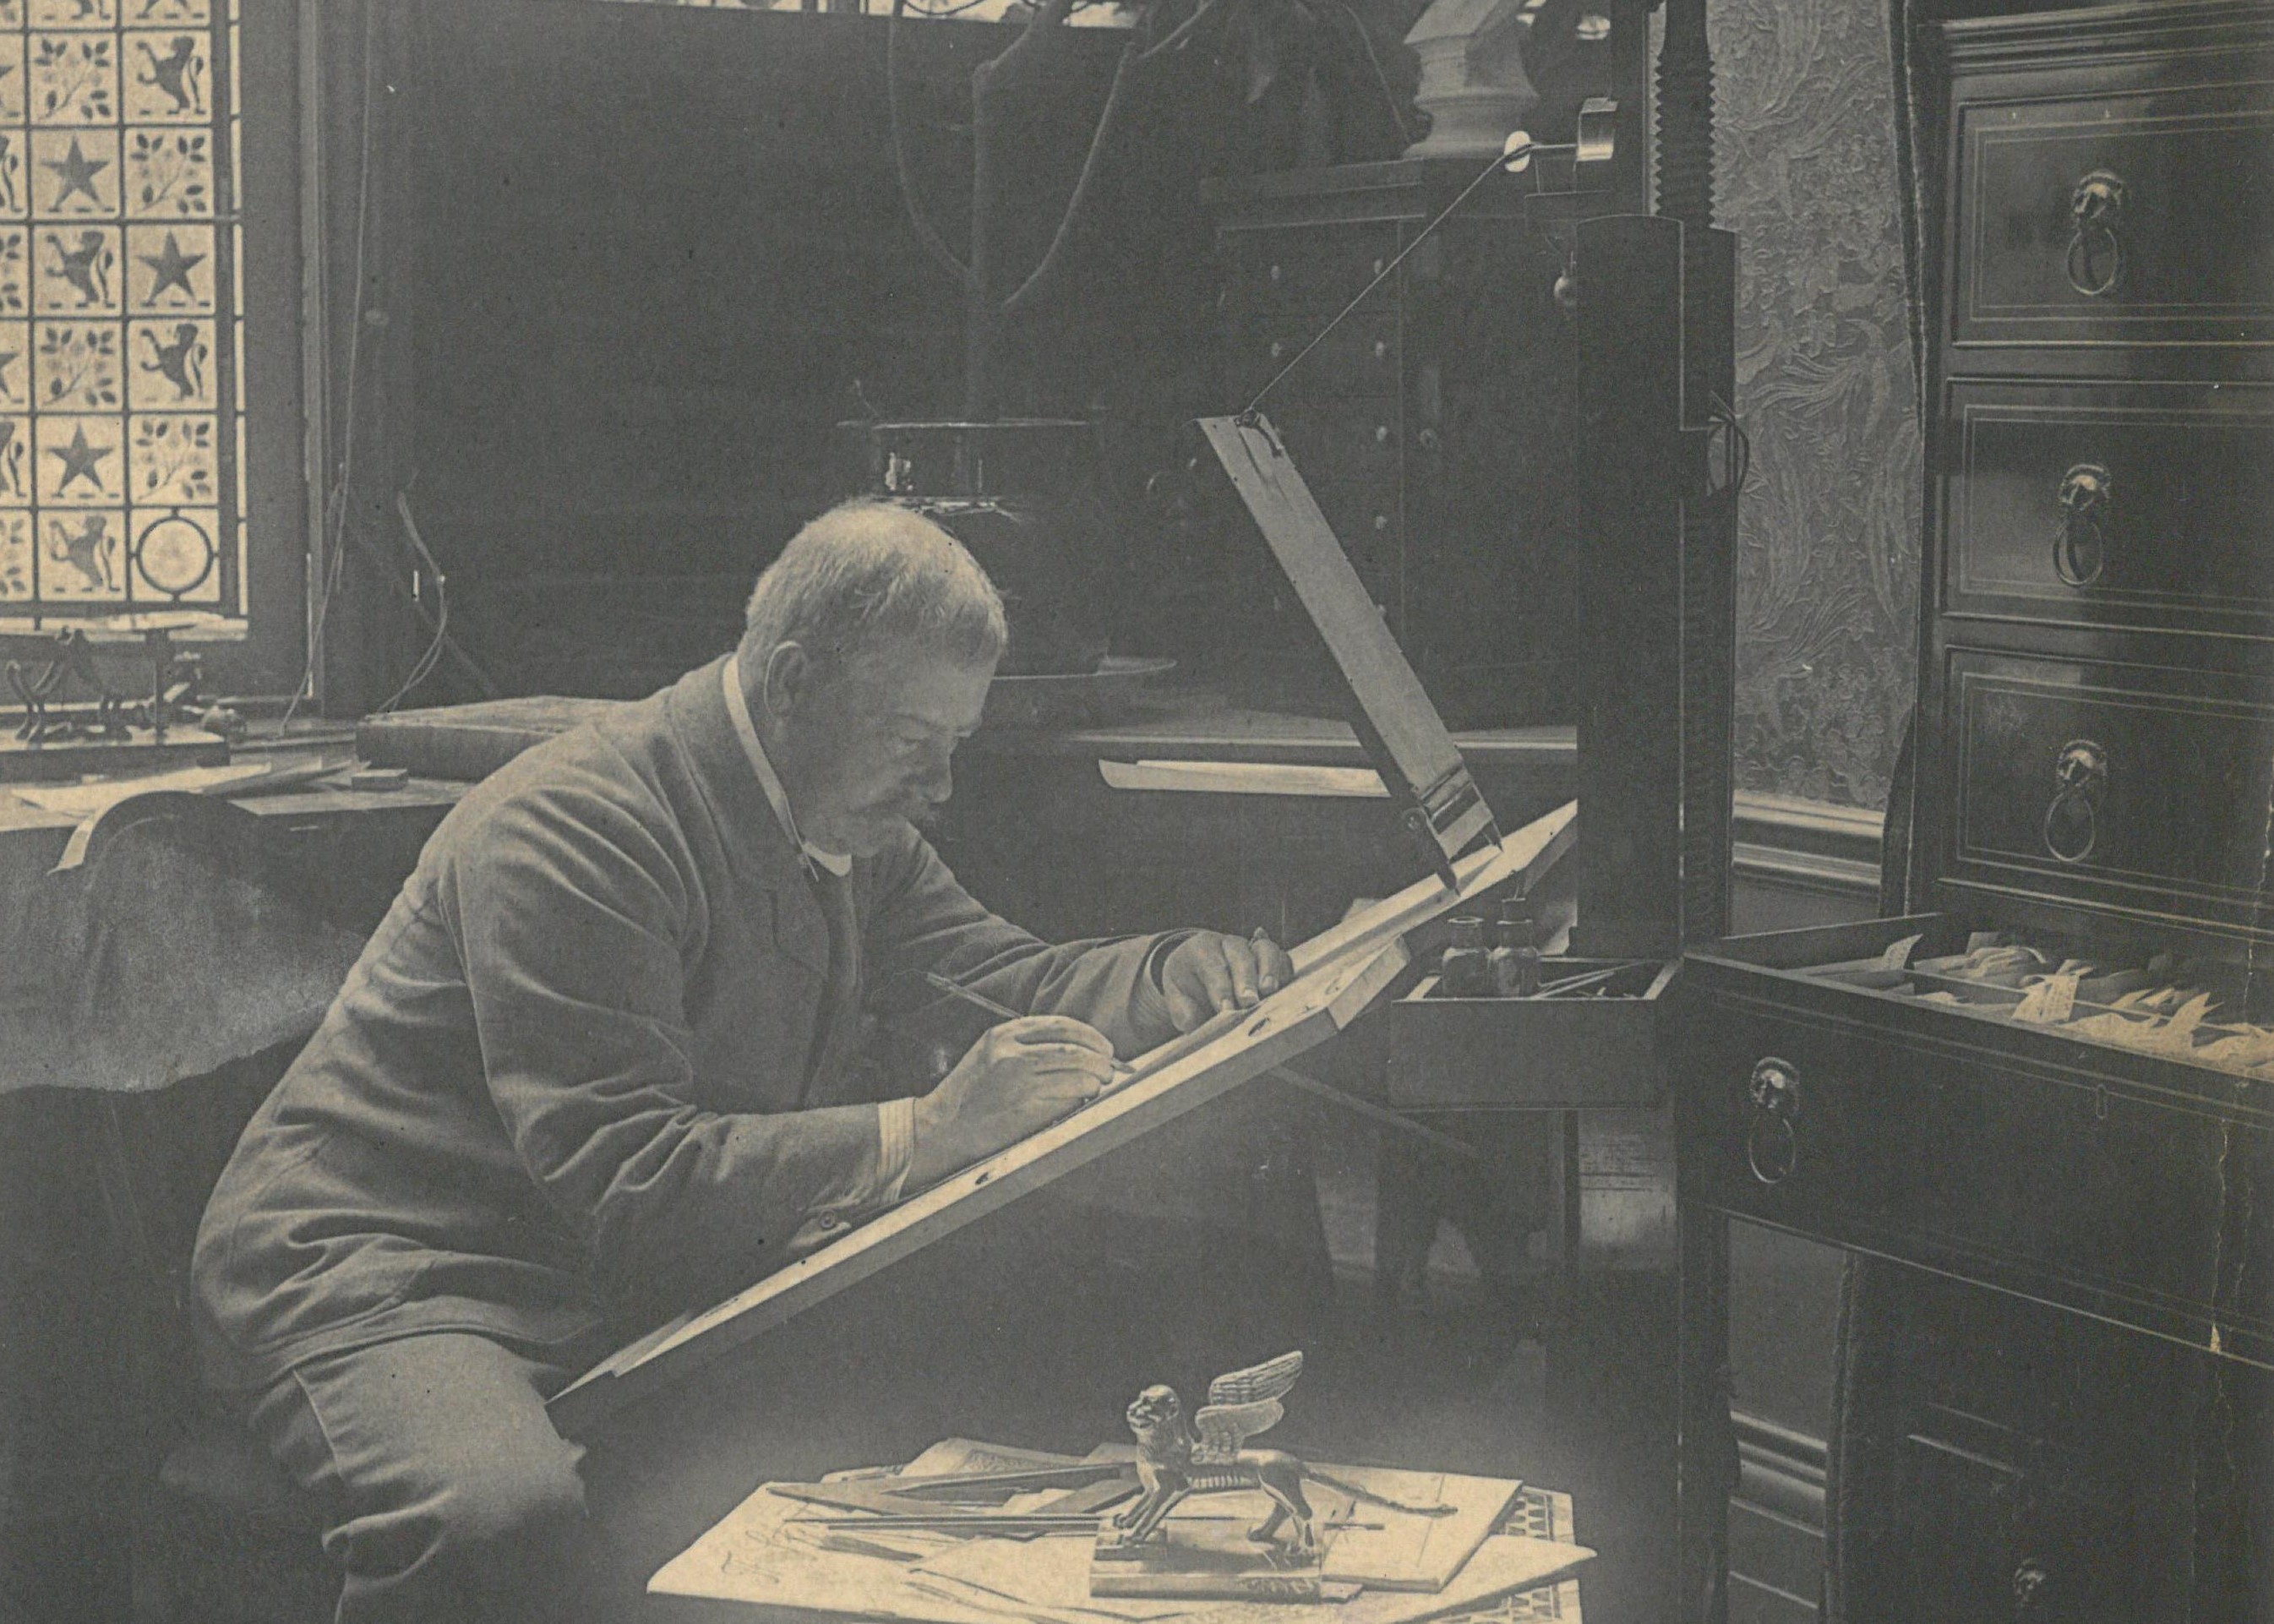 Photograph of Linley Sambourne at work in Drawing Room at Sambourne House.